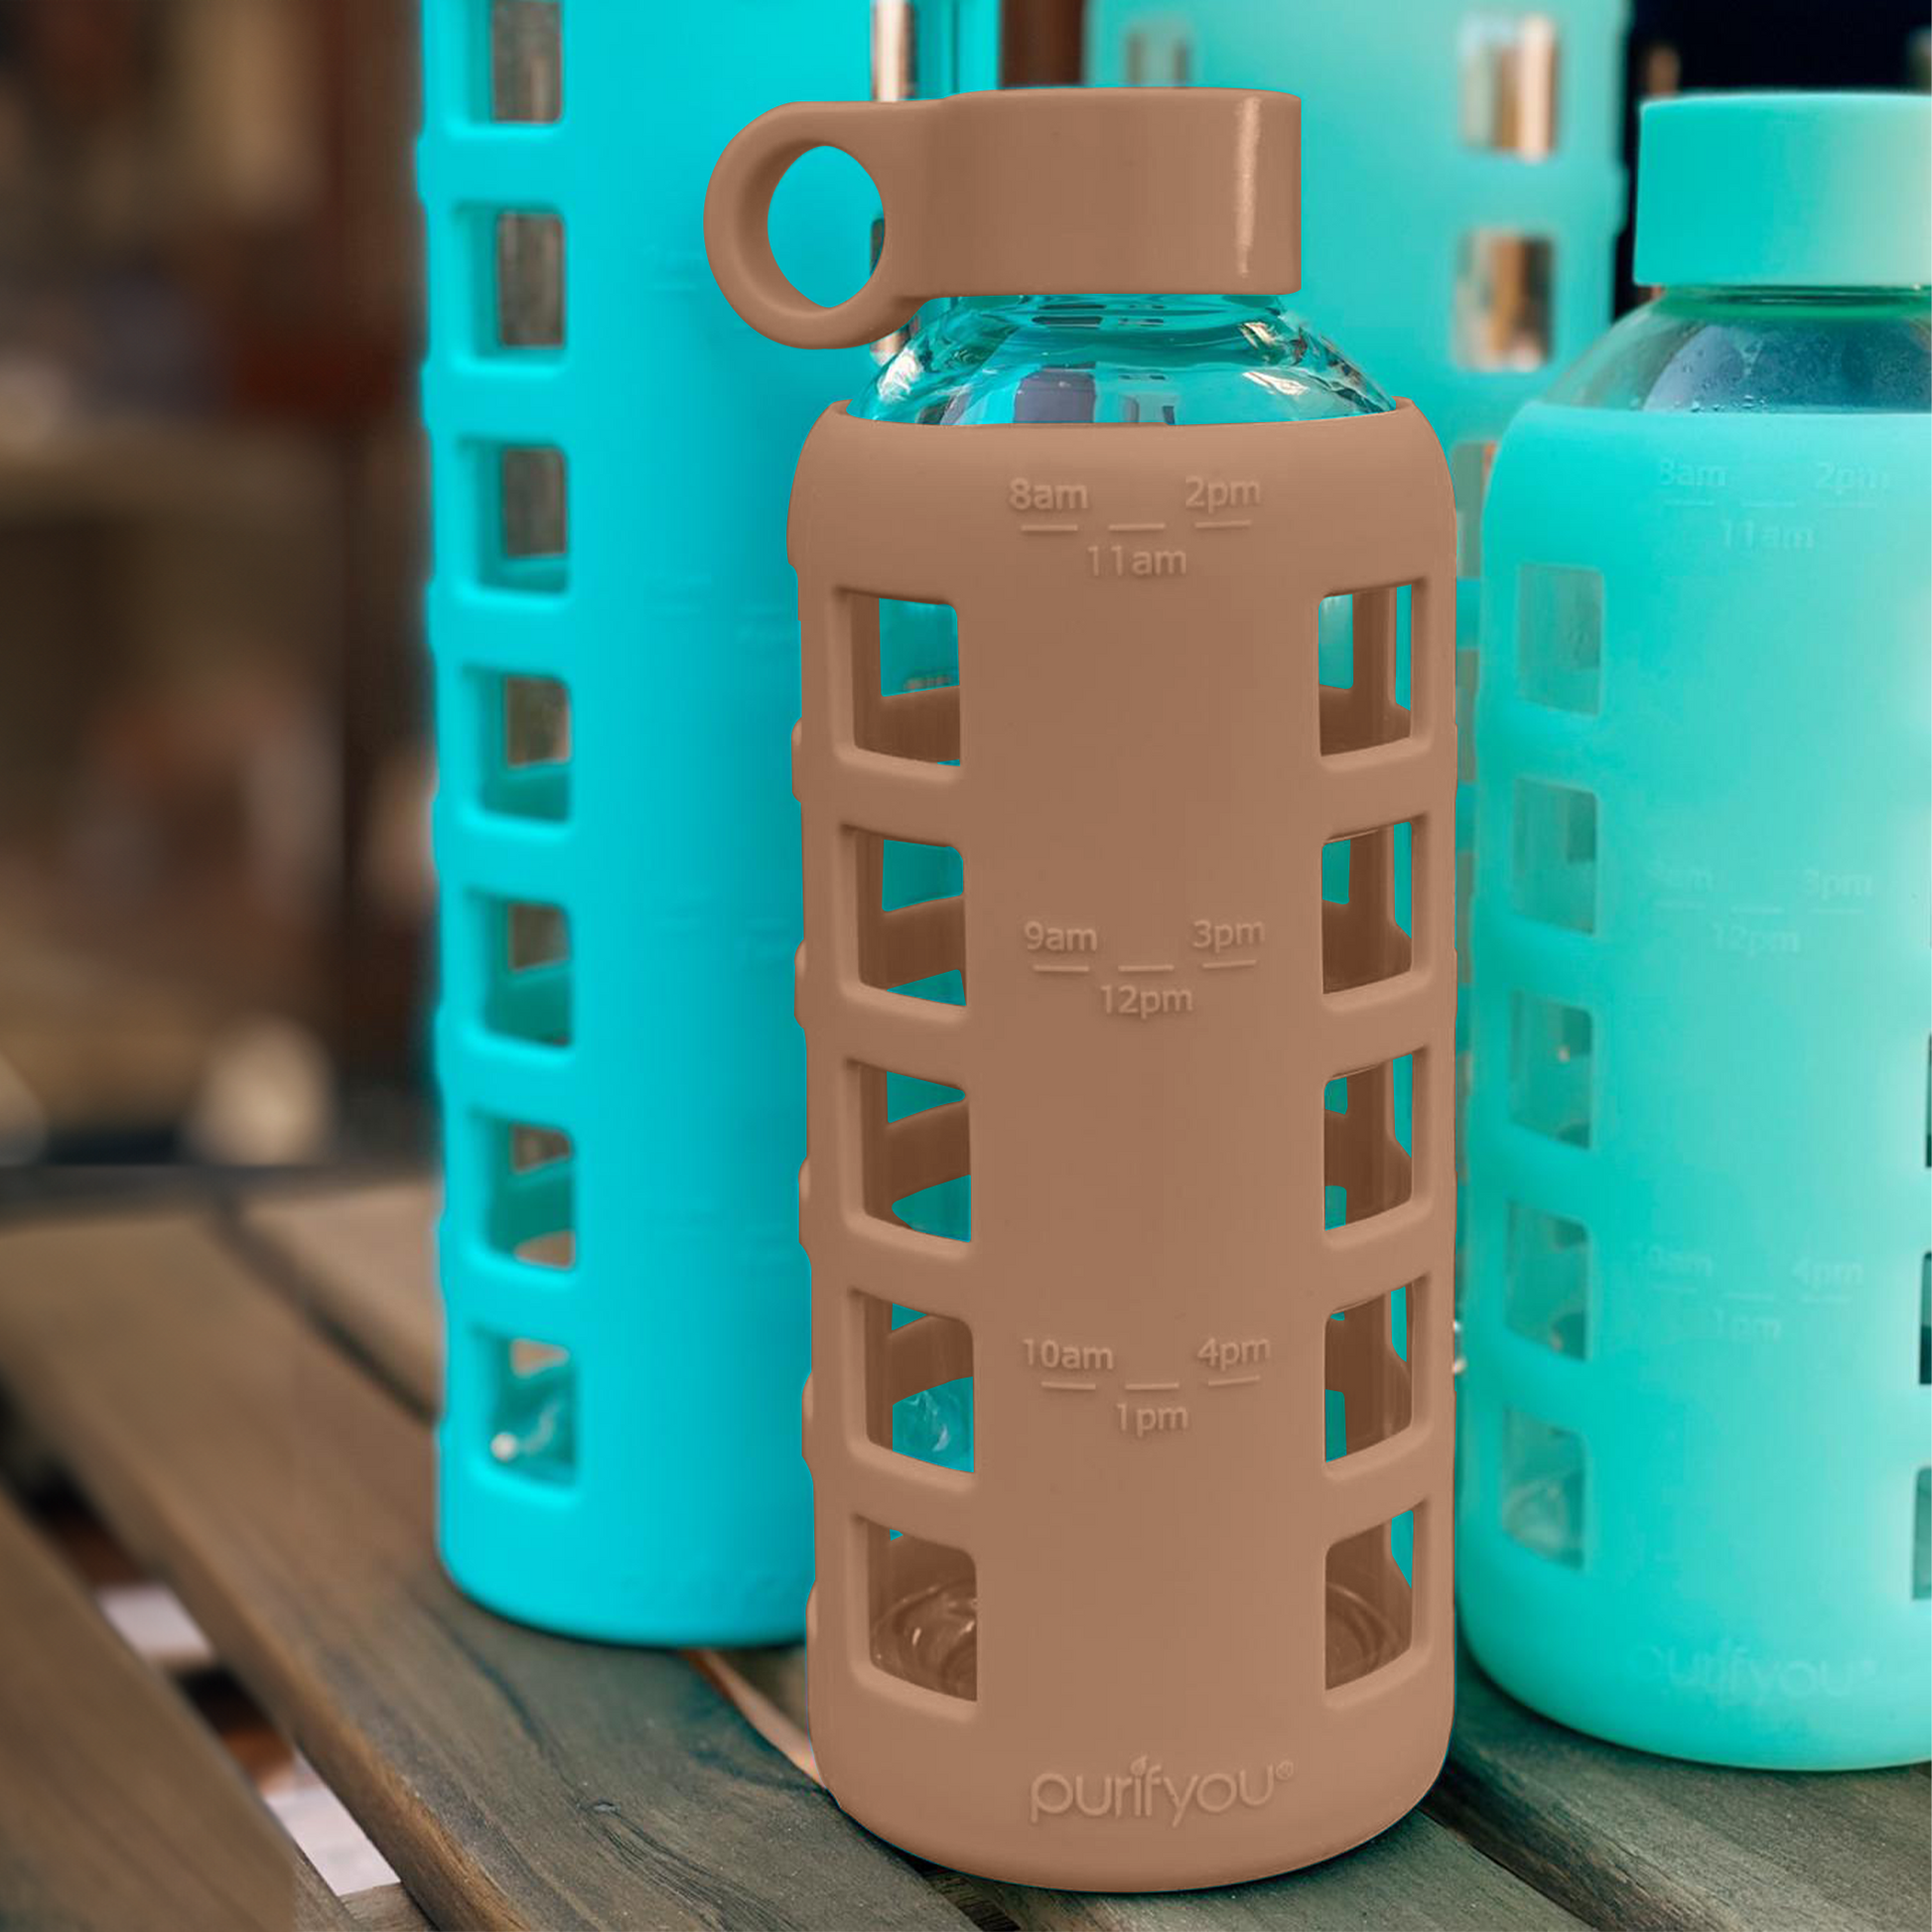 Buy Wholesale China Thick Bottom Pyrex Glass Water Bottle